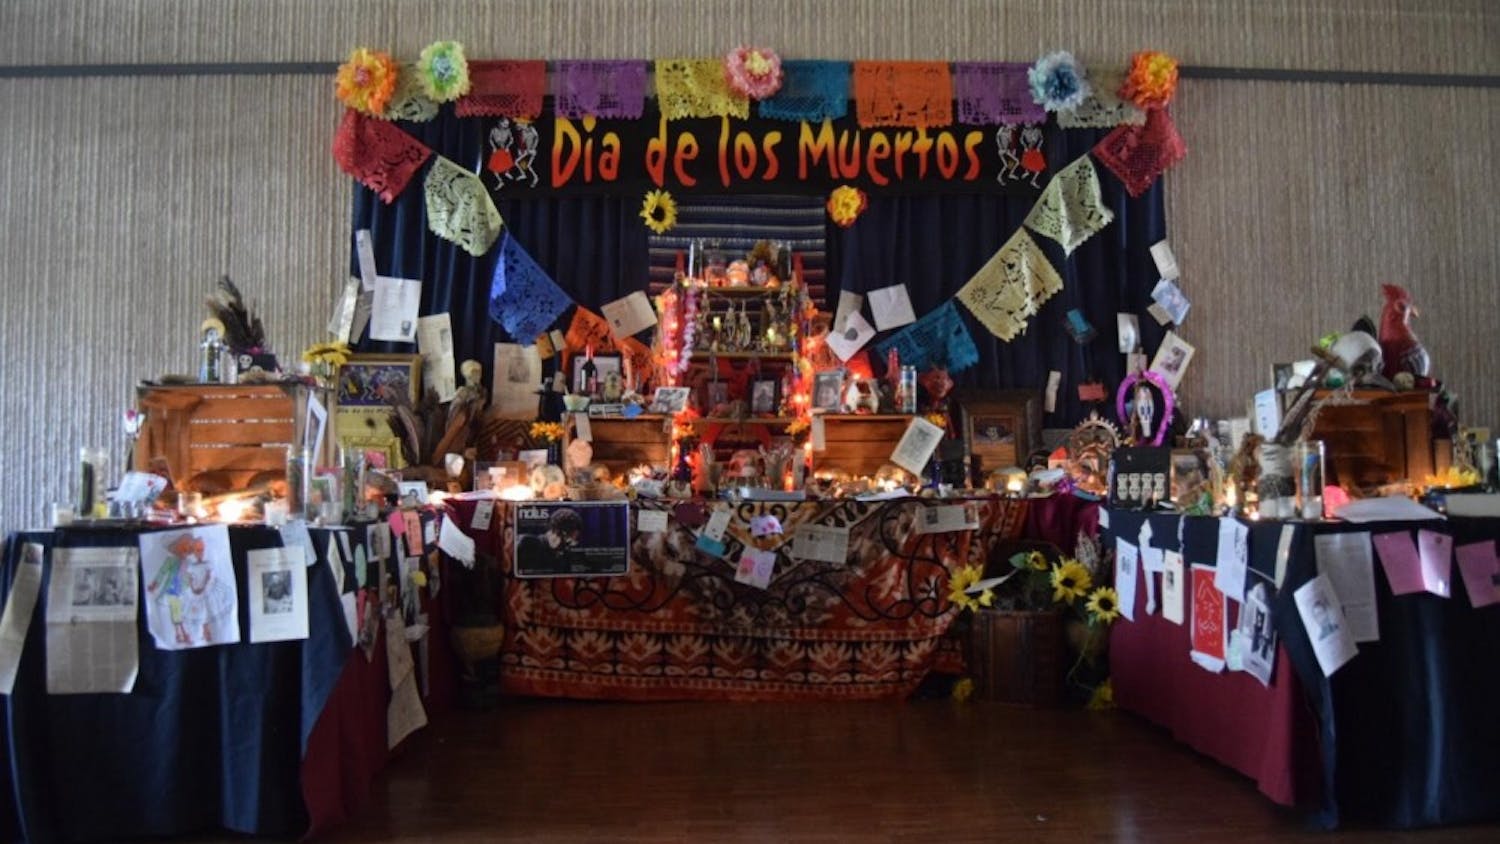 A Day of the Dead alter in the Mathers Museum was created to honor those who have passed.